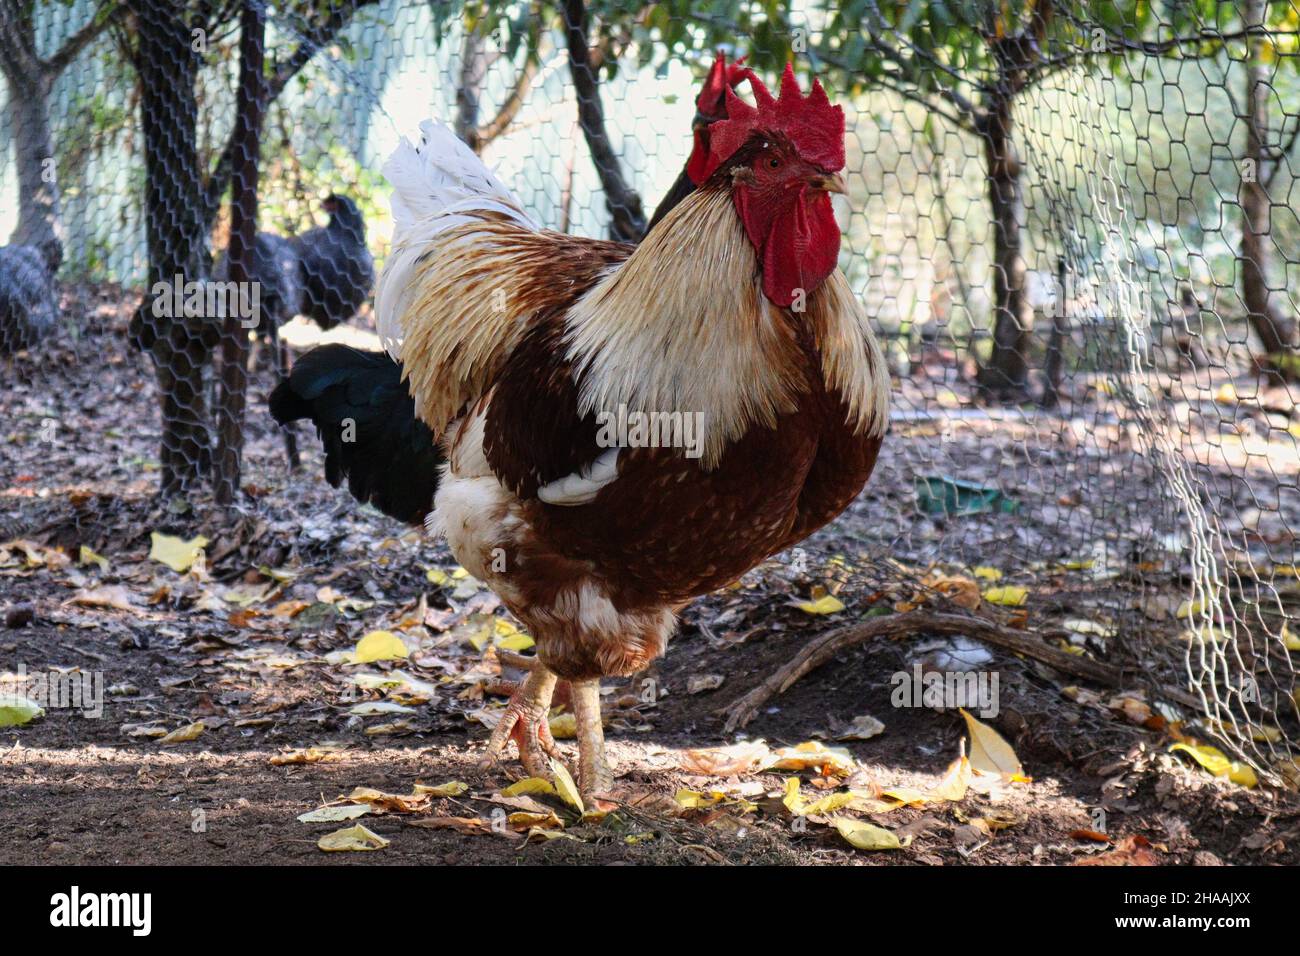 A white and brown rooster (or cockerel) standing in a chicken coop Stock Photo